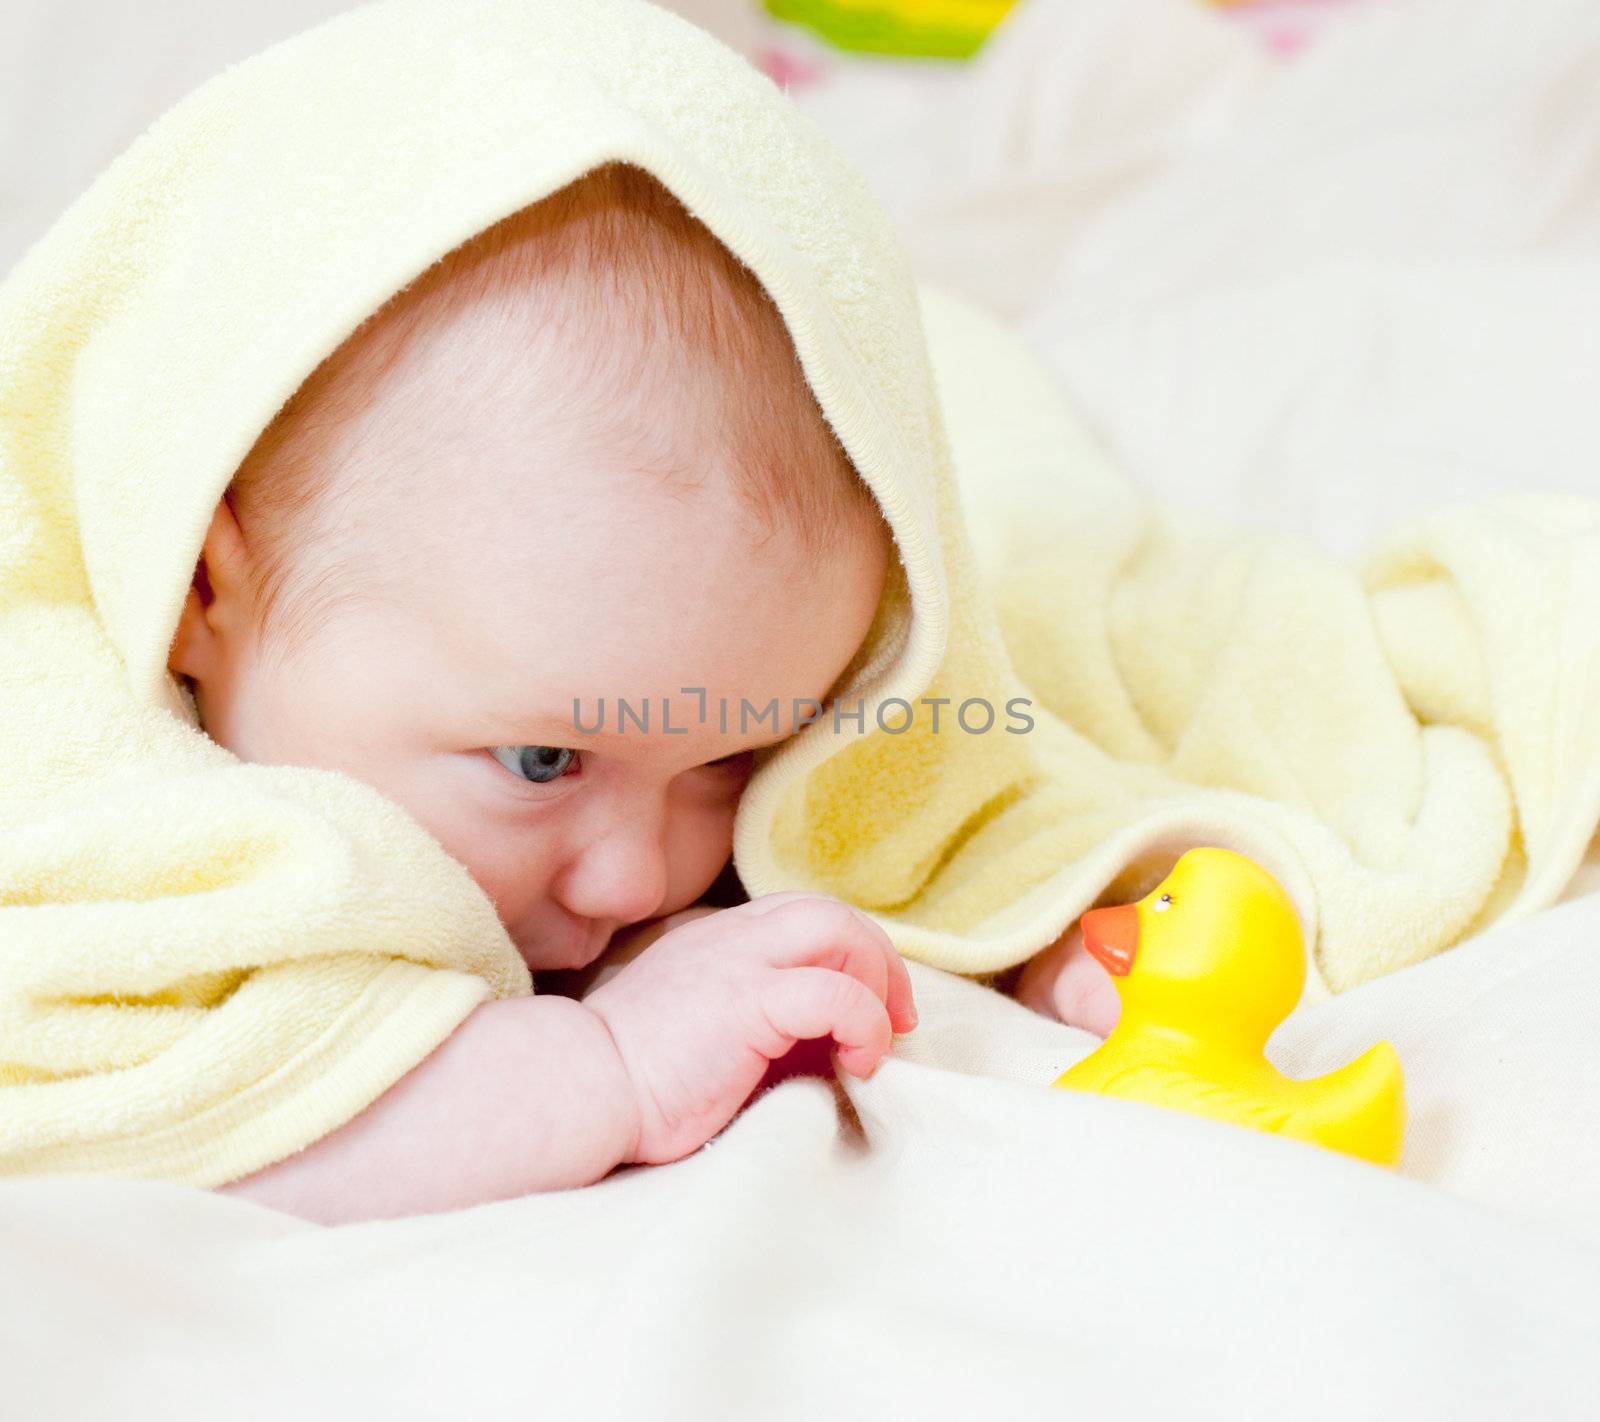 Infant playing with rubber duck by naumoid